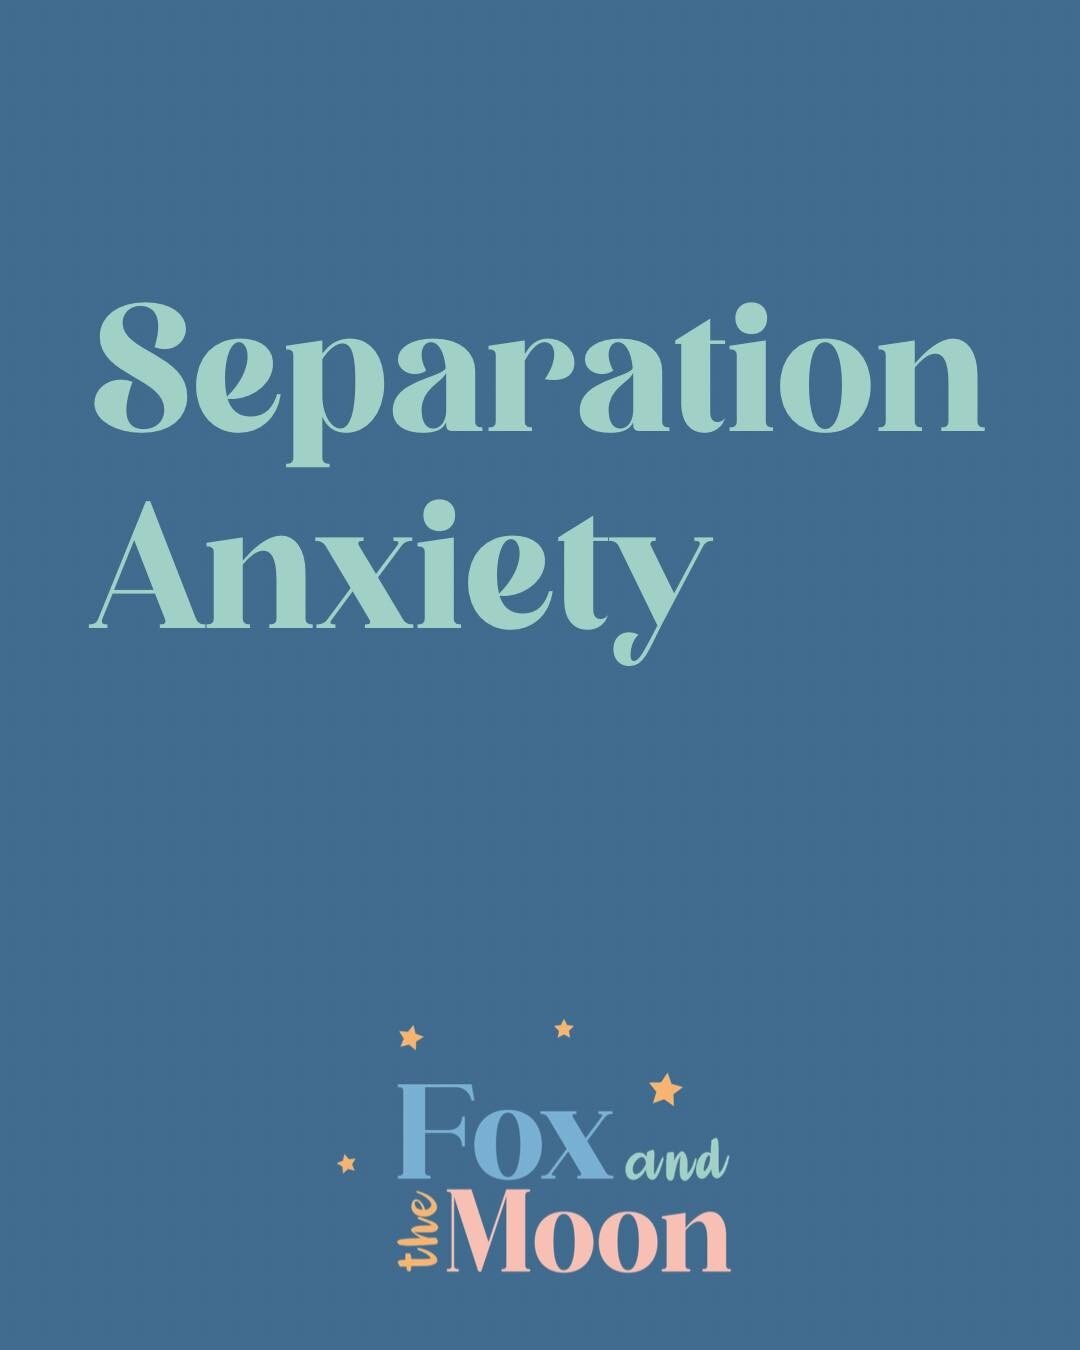 Separation anxiety is tough for both parents and children and it can affect sleep a lot. 

It normally peaks between 10 -18 months old and can last until your child is 3. It&rsquo;s human nature for children to want to stay where they feel safest. 

